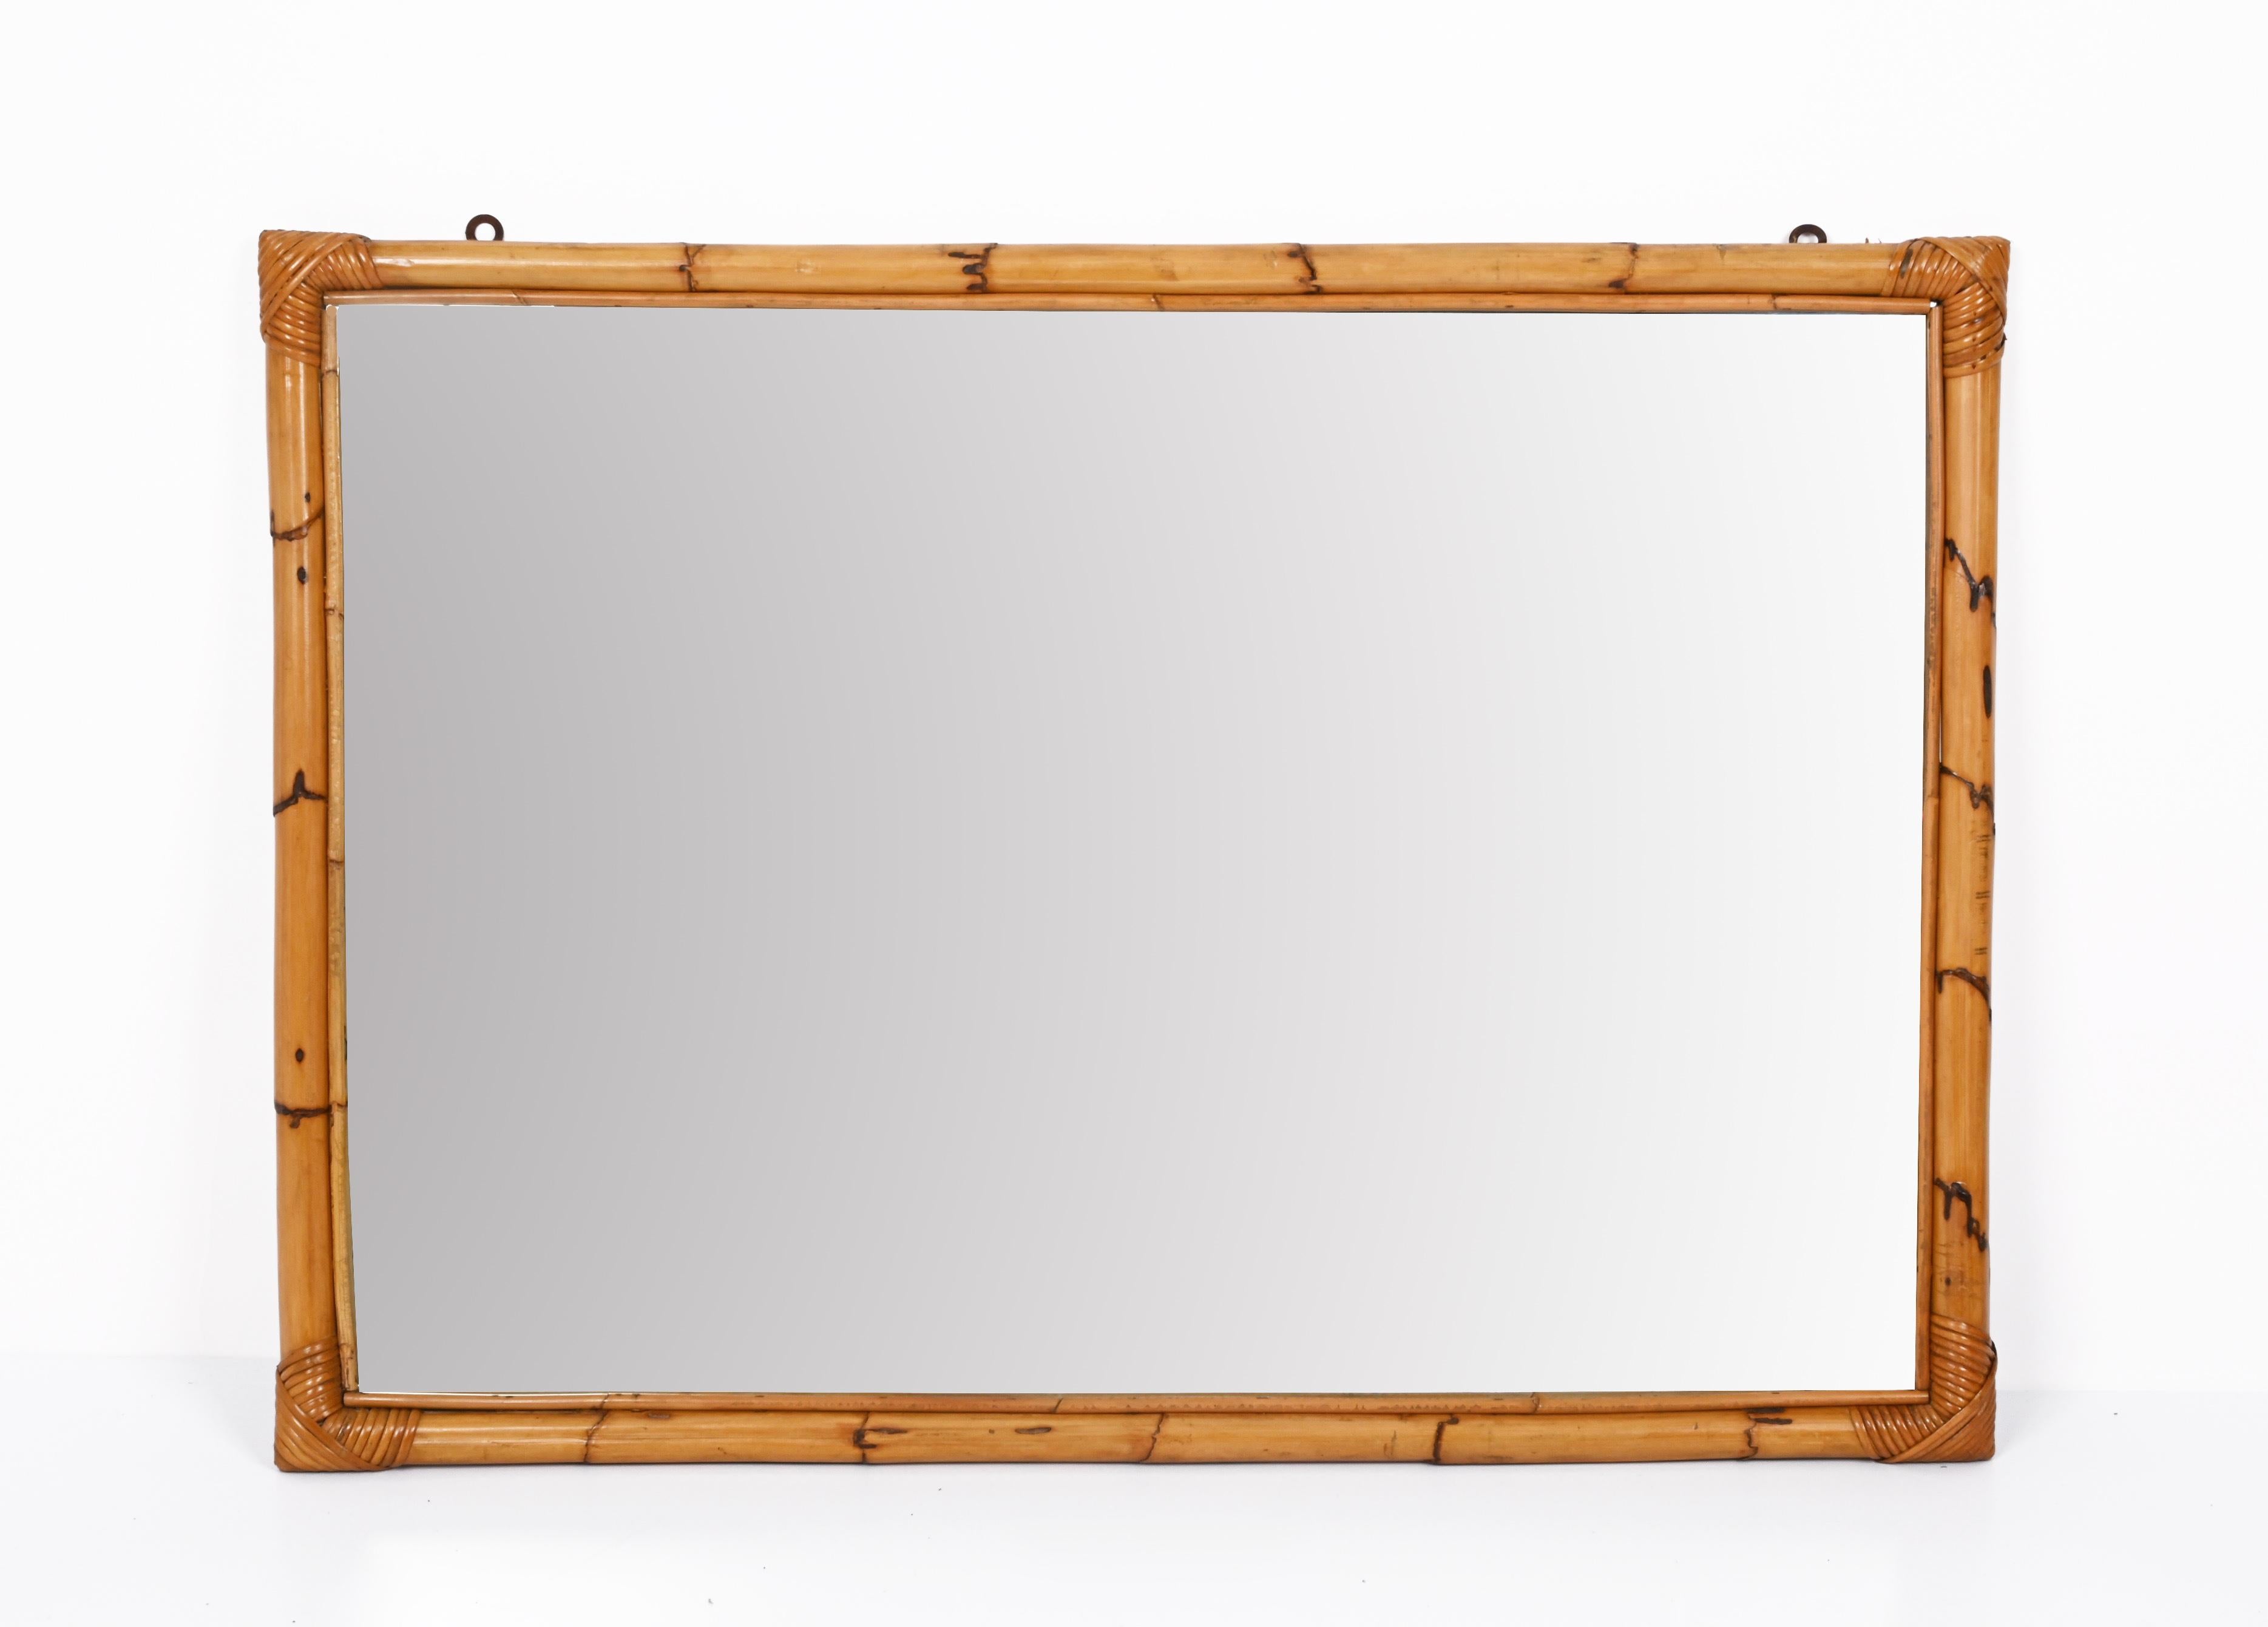 Midcentury Large Rectangular Italian Mirror with Double Bamboo Cane Frame, 1970s For Sale 9